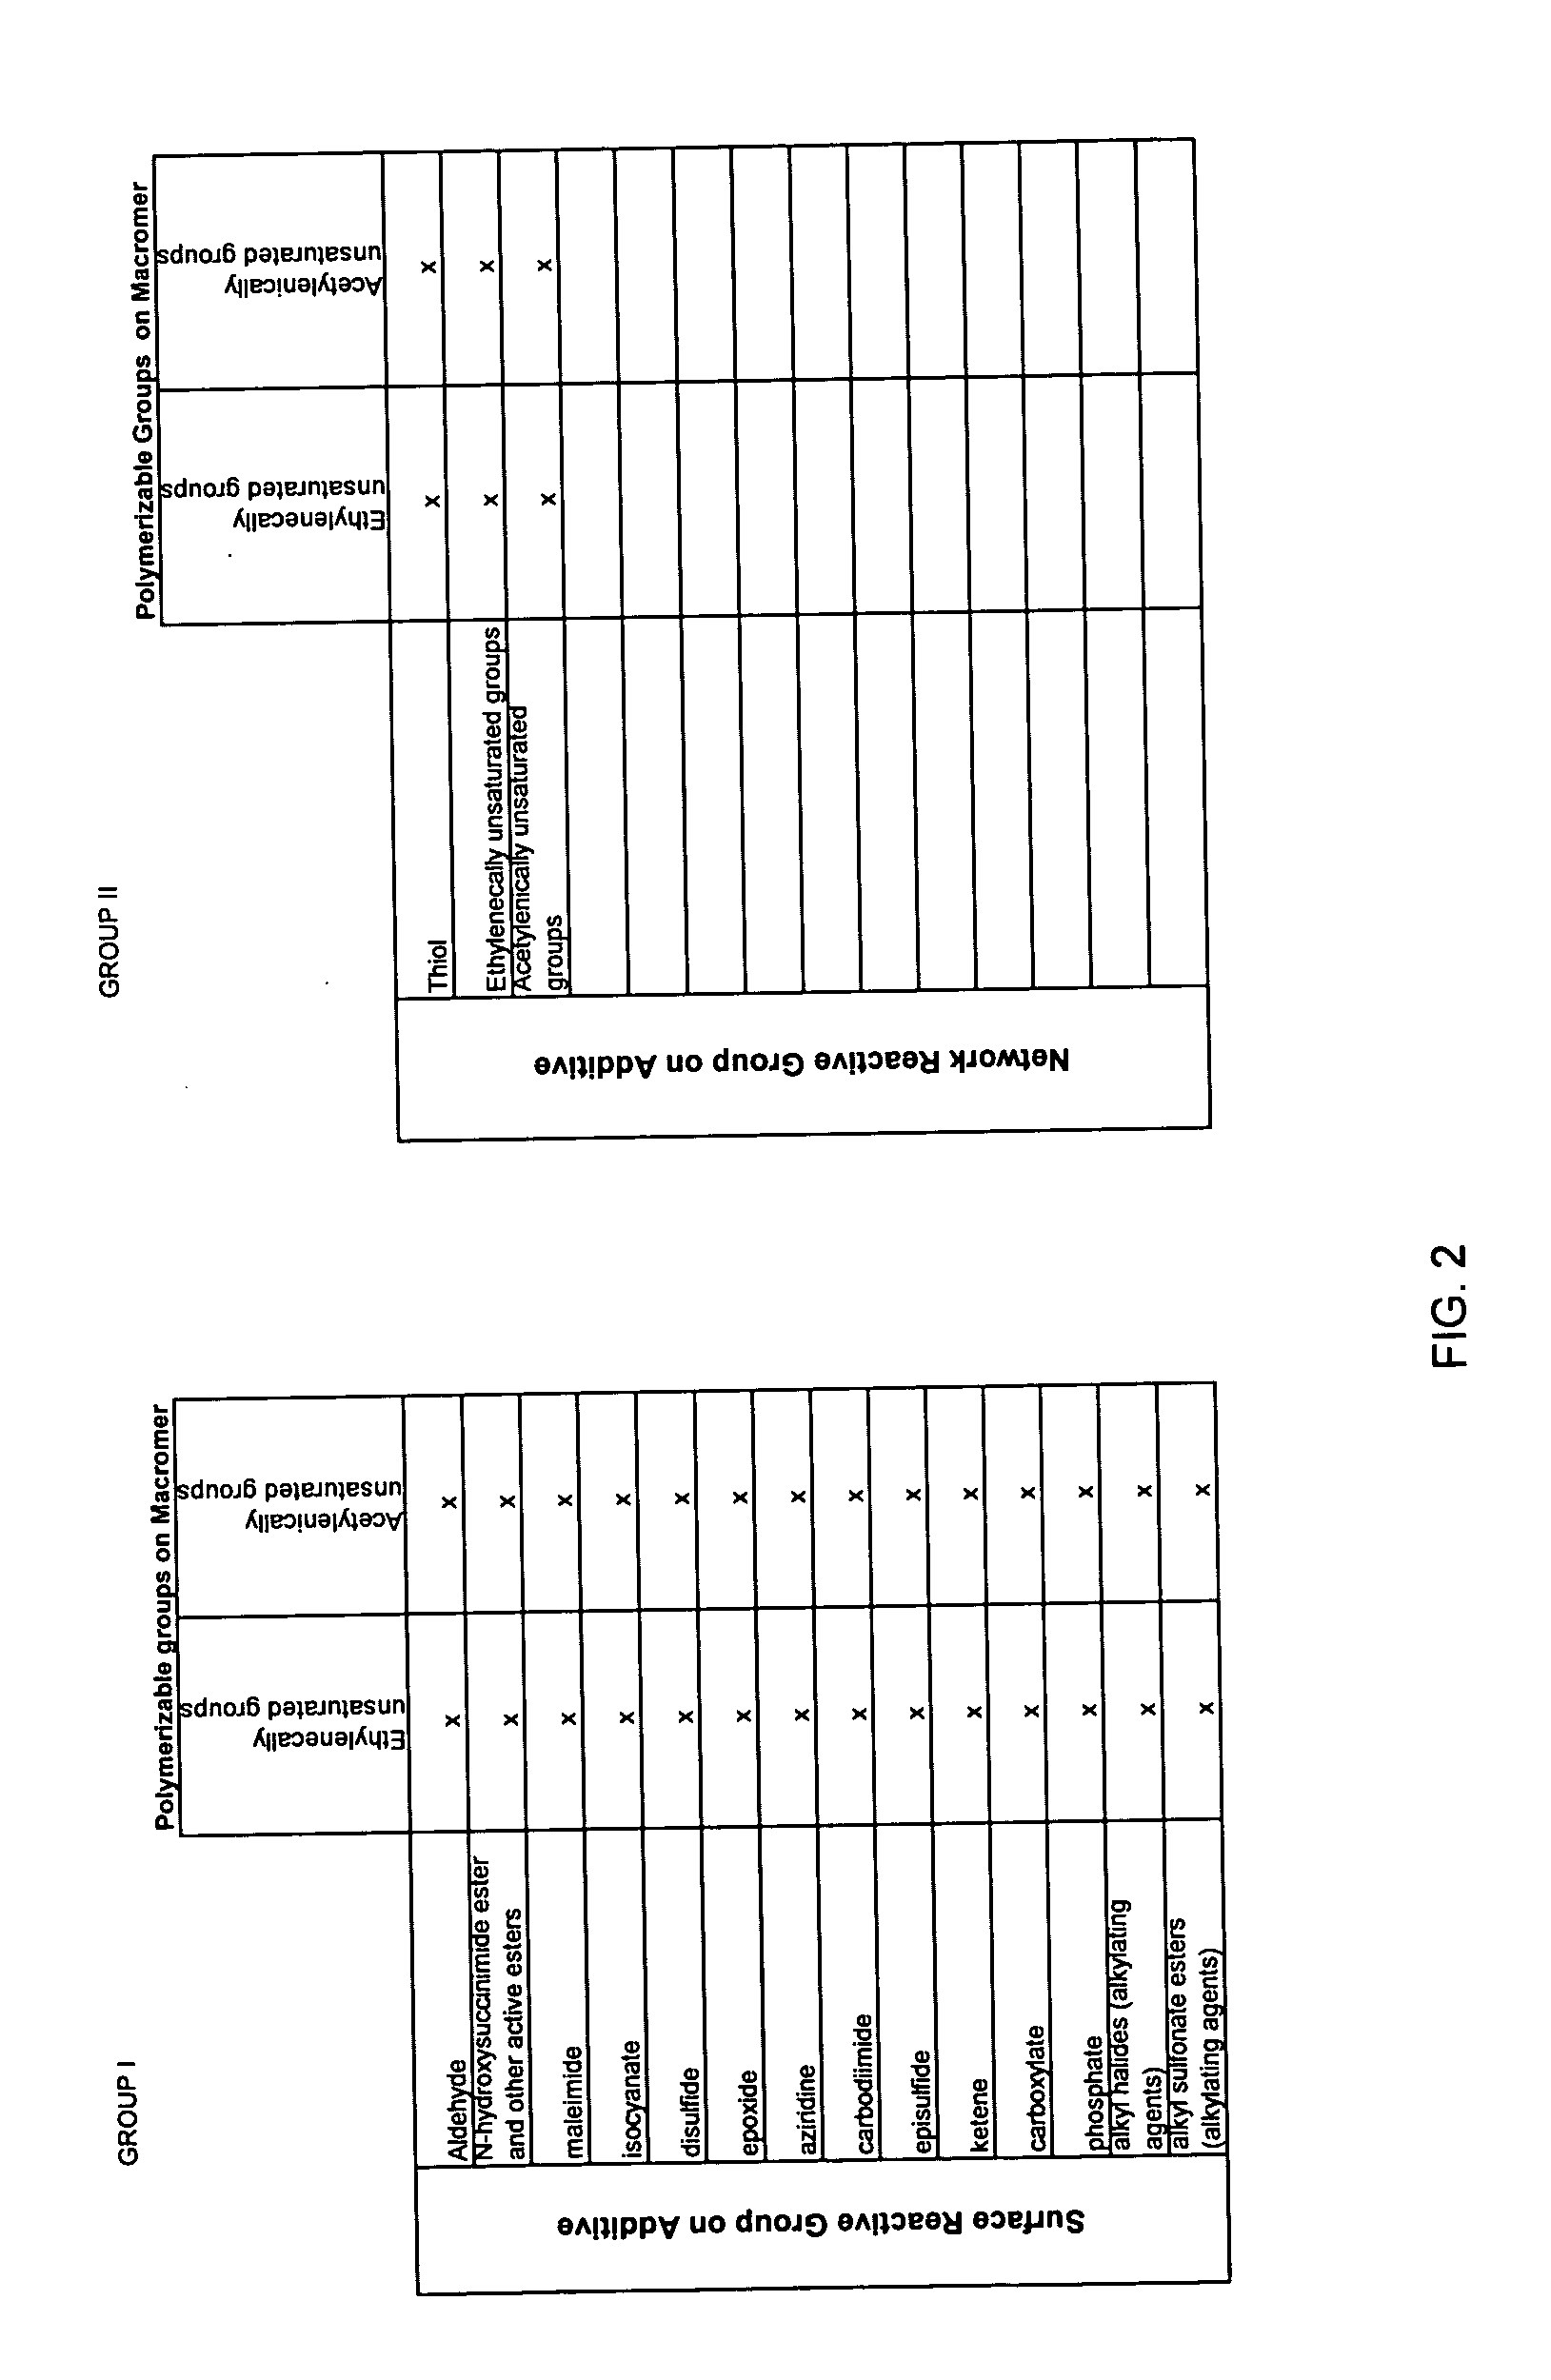 Adherent polymeric compositions